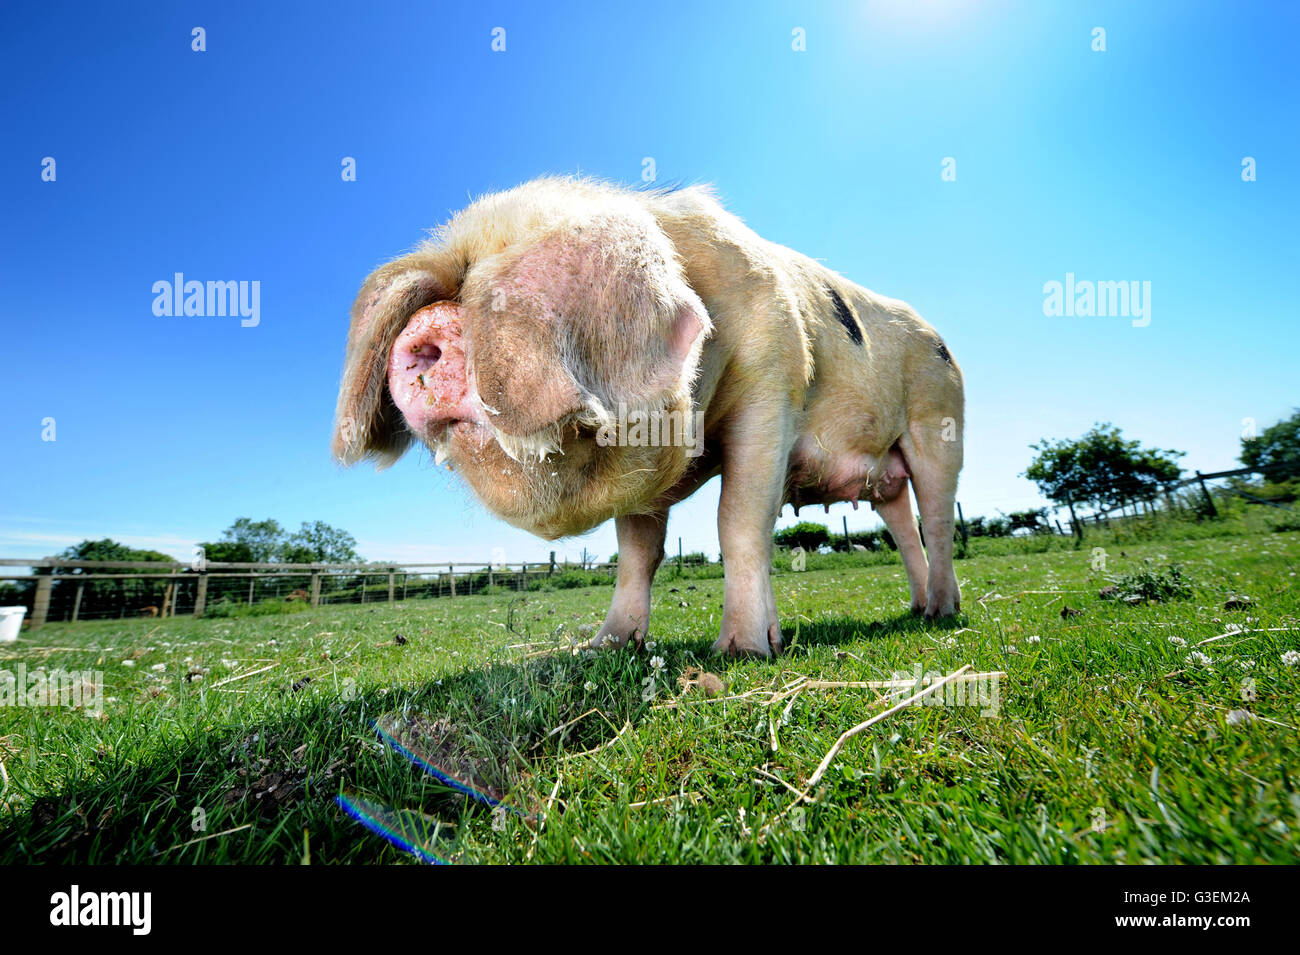 A Gloucester Old Spot pig on a hot day near Cirencester, Gloucestershire UK Stock Photo